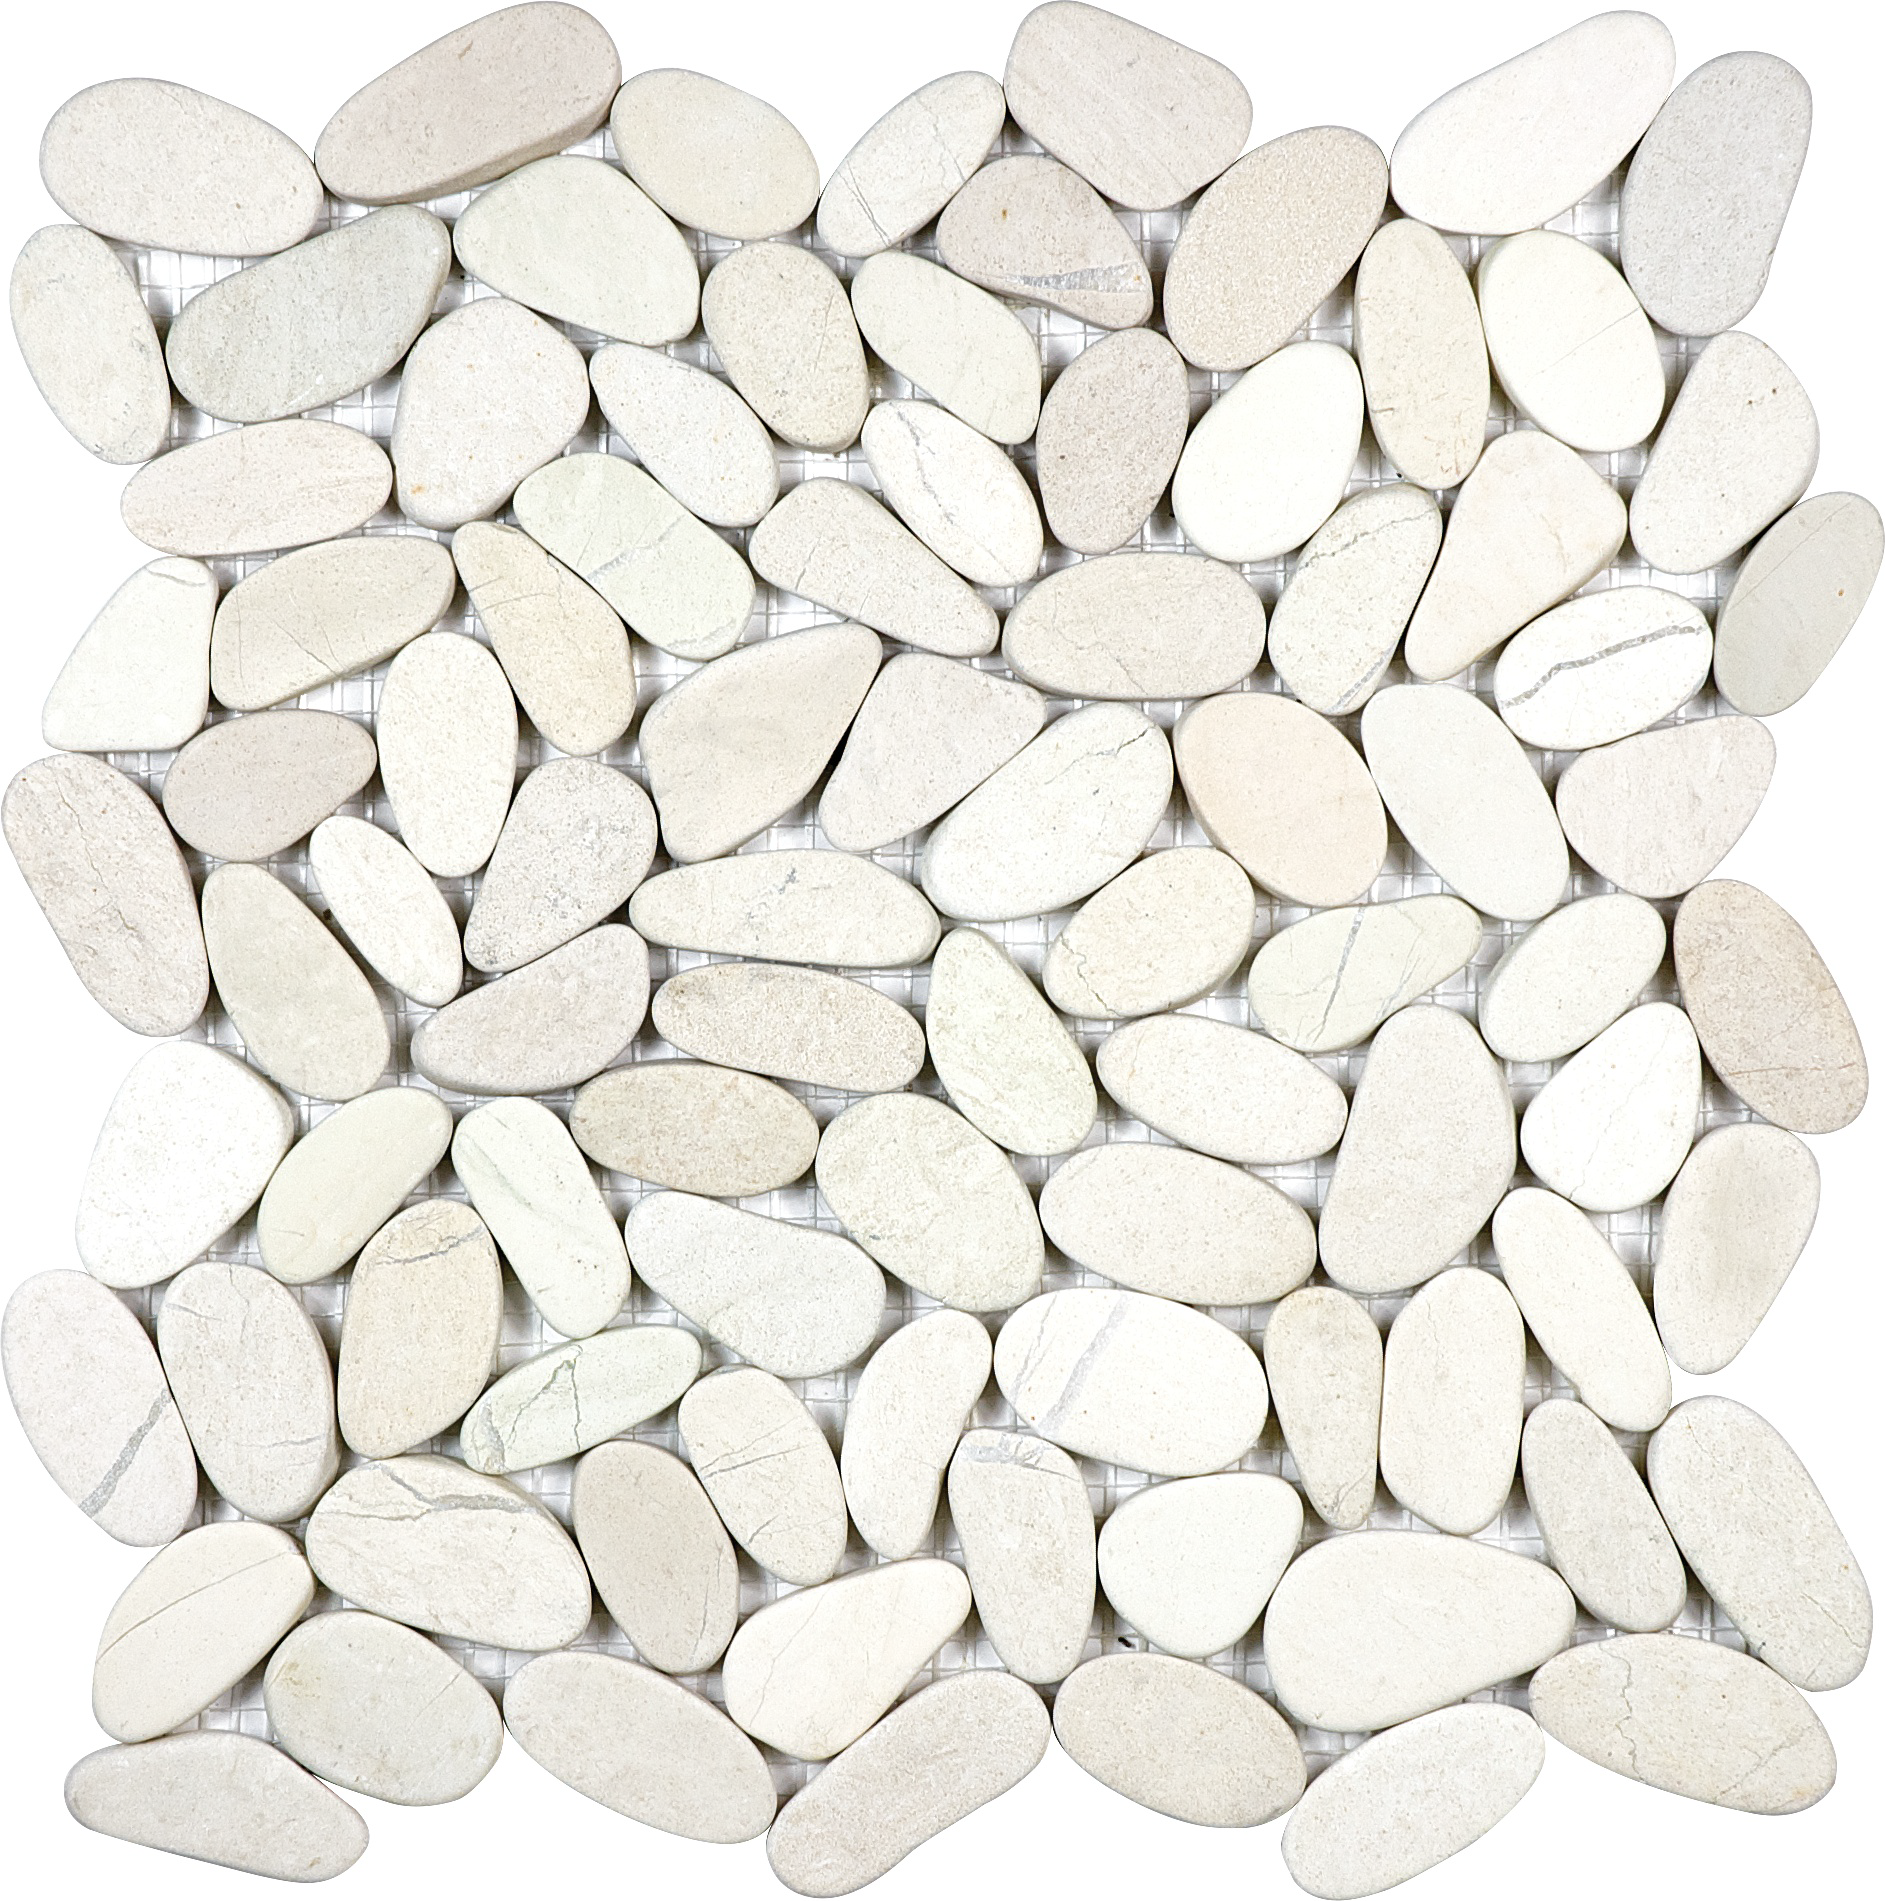 pebble serenity ivory flat pebble pattern natural stone mosaic from zen anatolia collection distributed by surface group international matte finish straight edge edge mesh shape